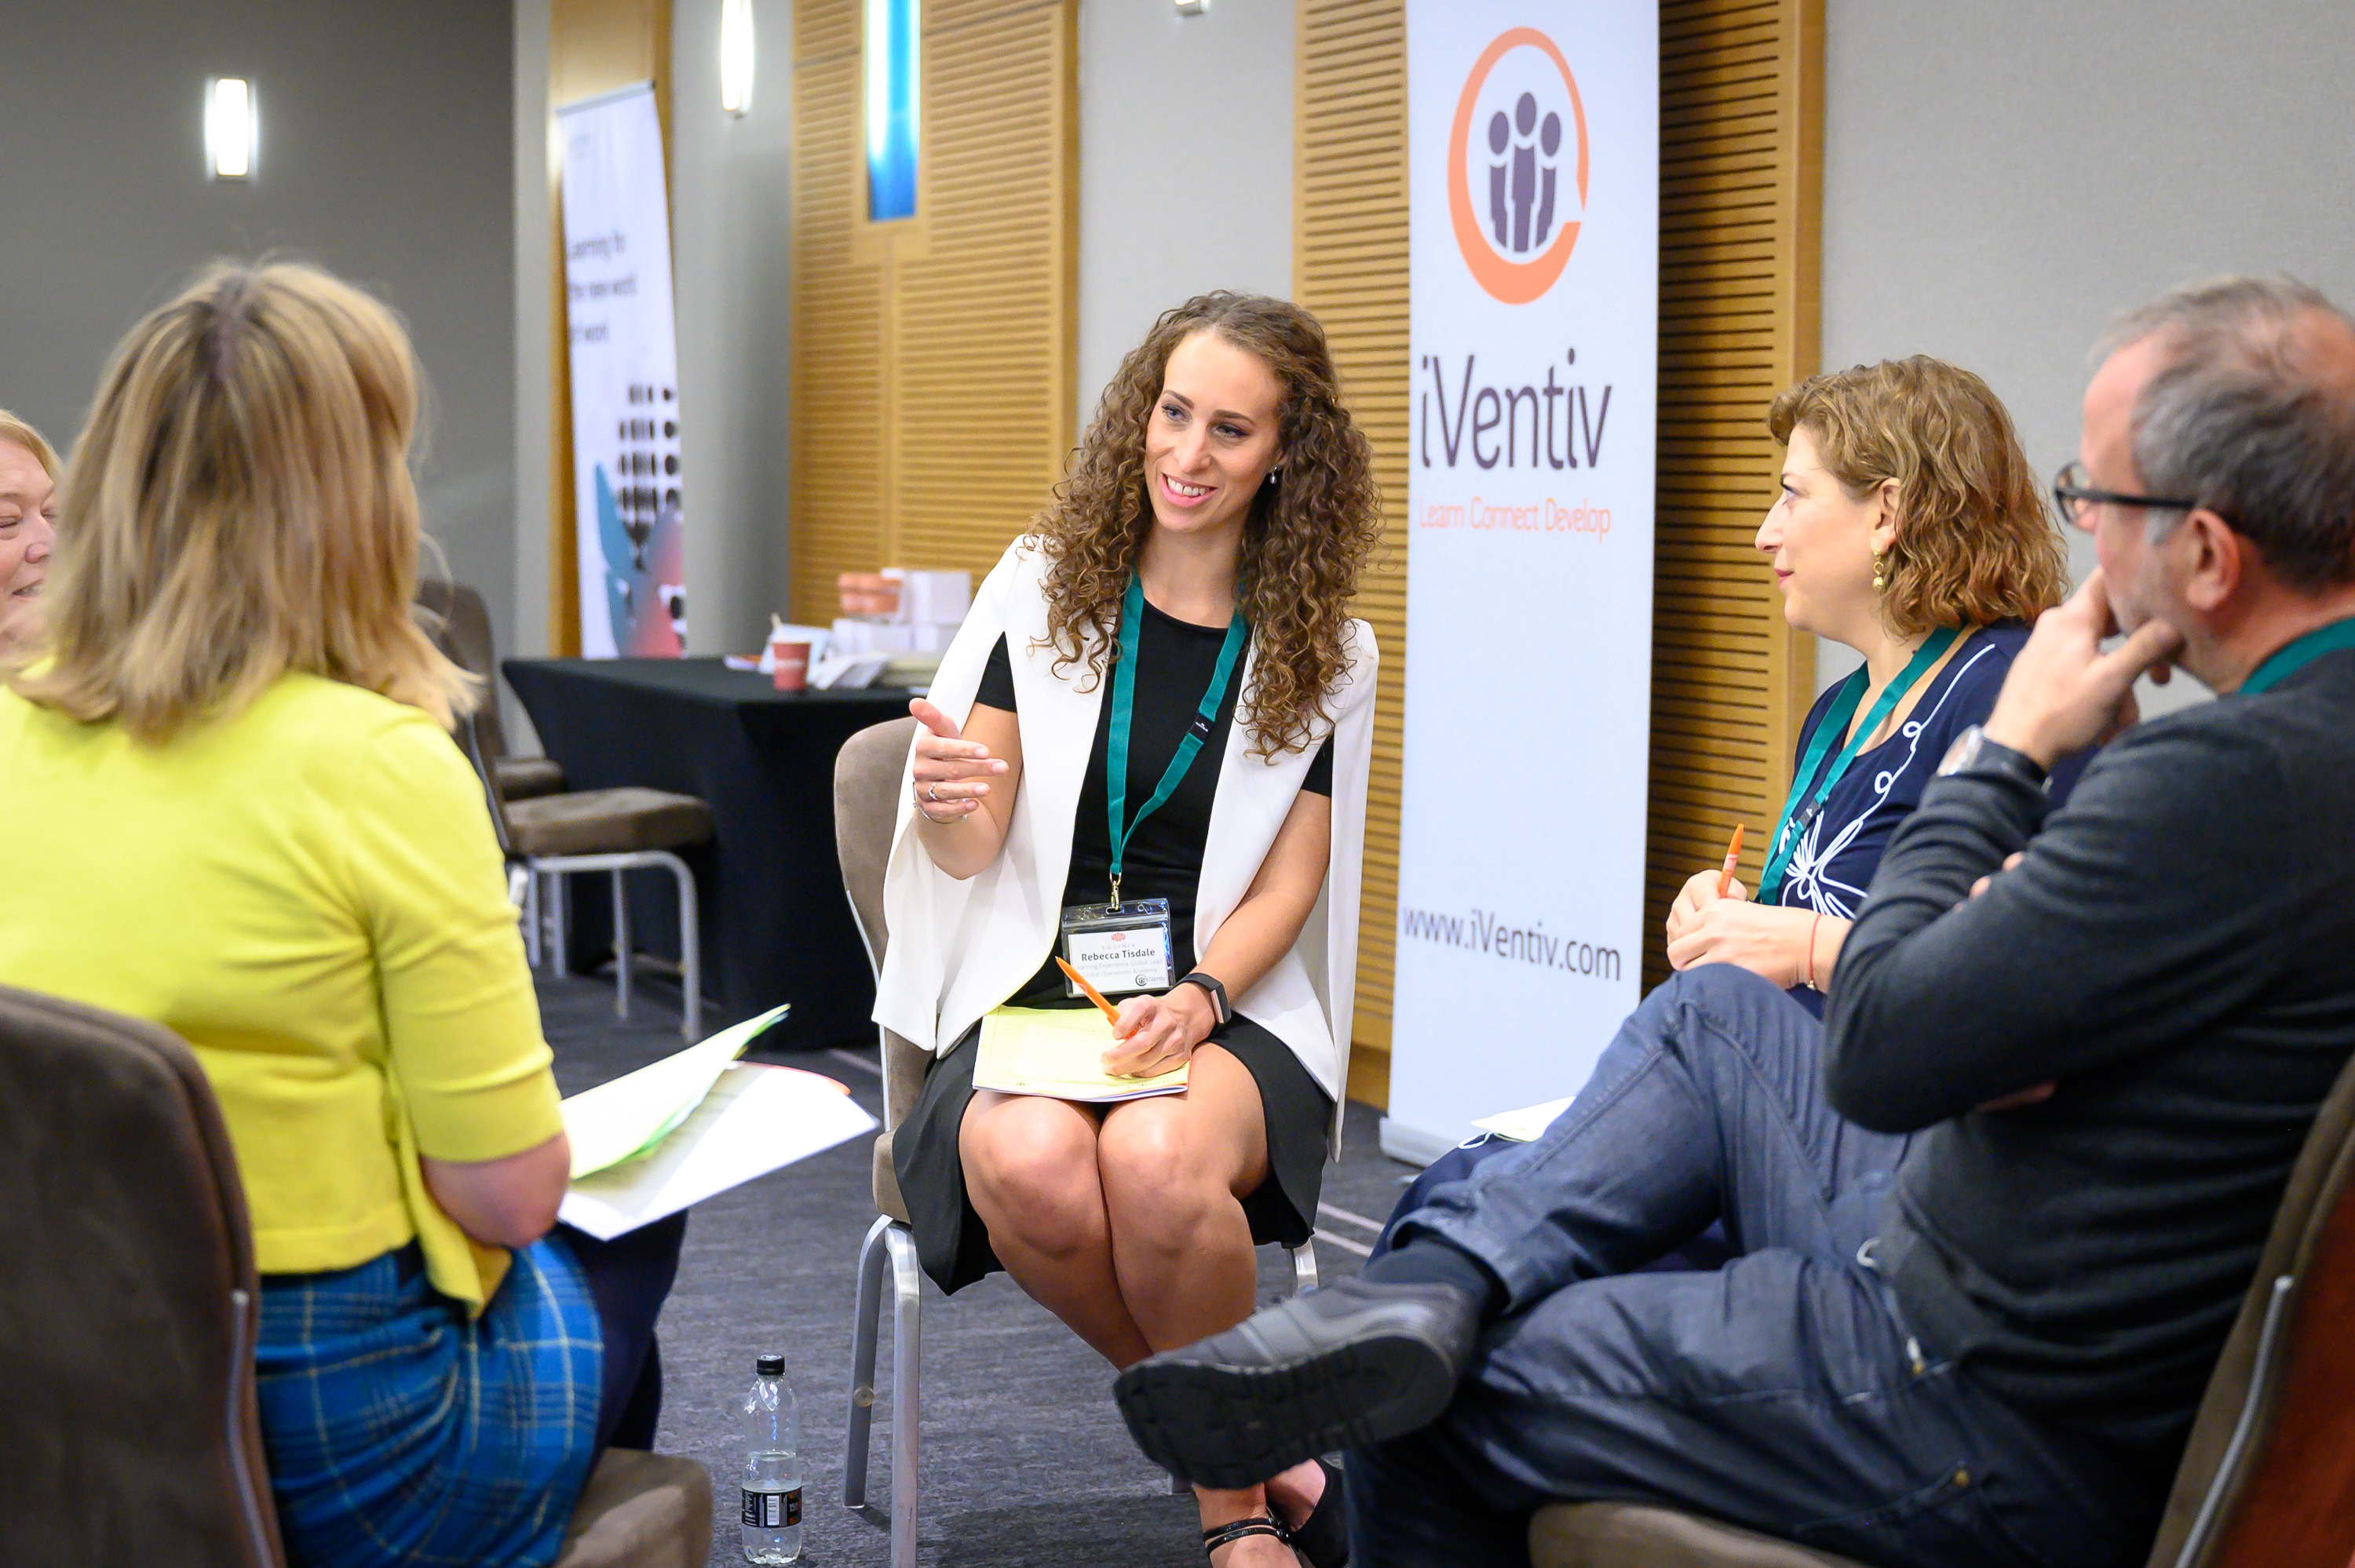 Participants smiling and talking during a breakout session at an iVentiv event